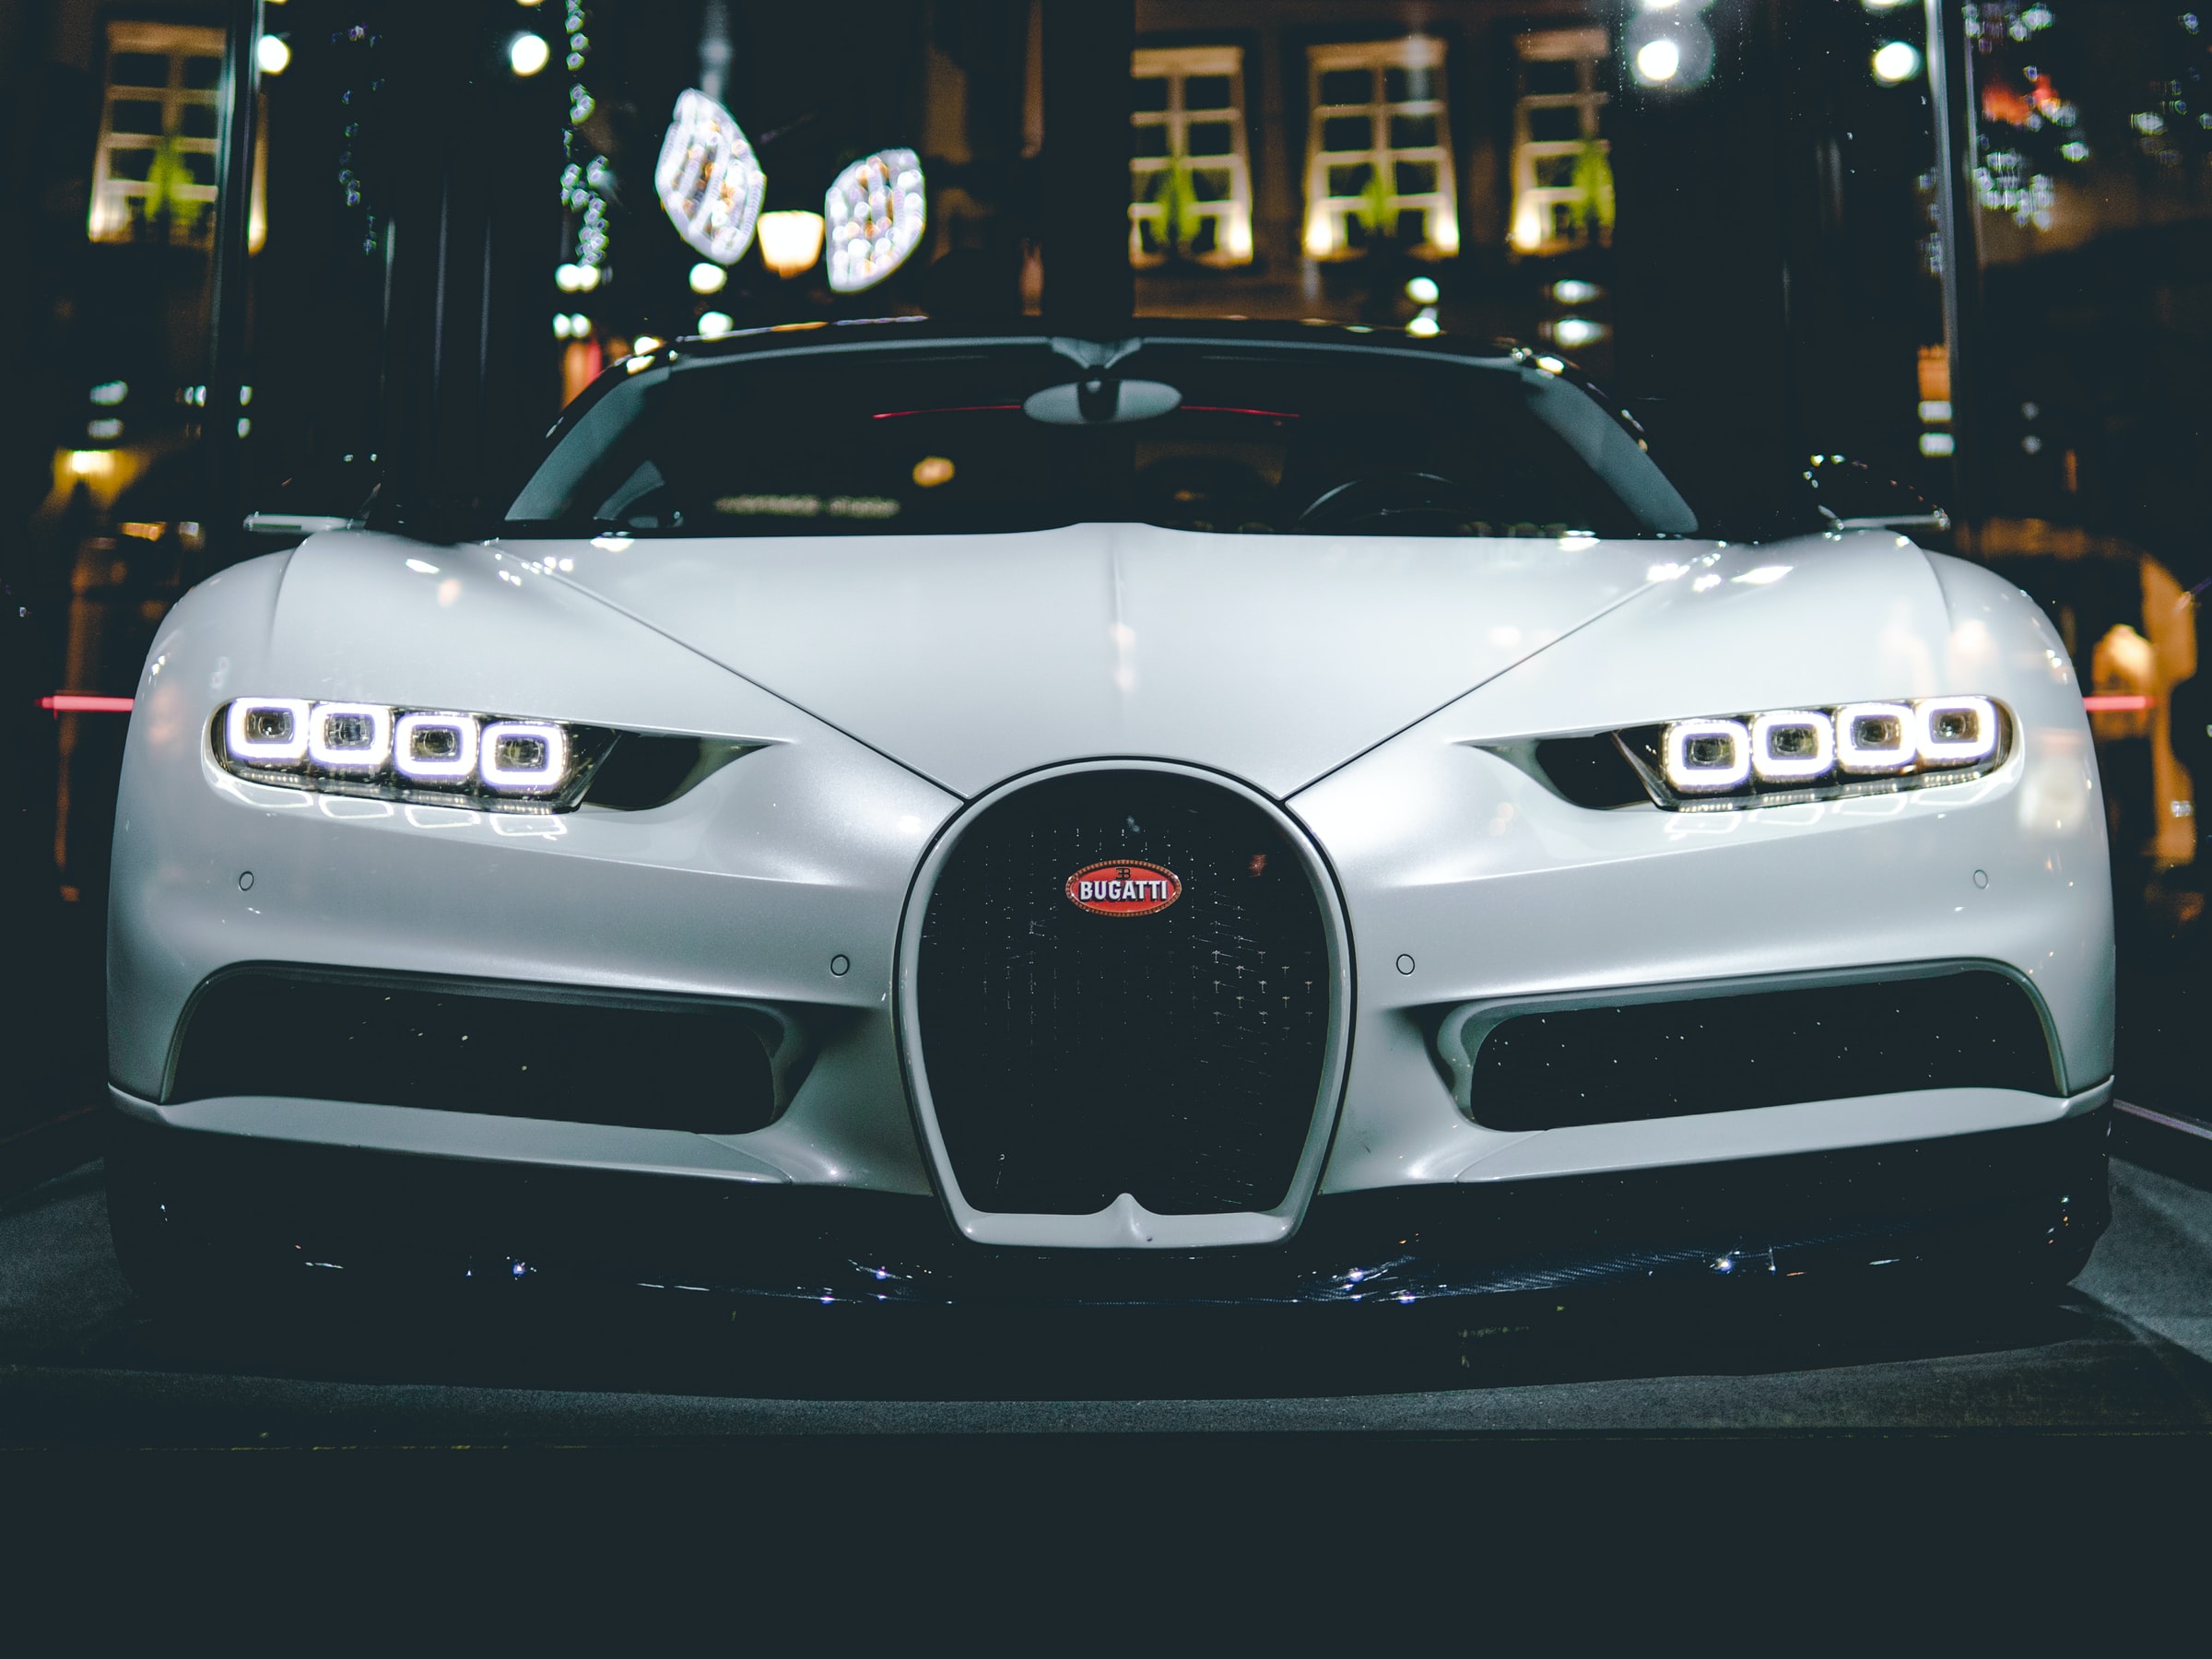 Bugatti Chiron SS Comes In Hot With A Top Speed Of 273 Miles Per Hour